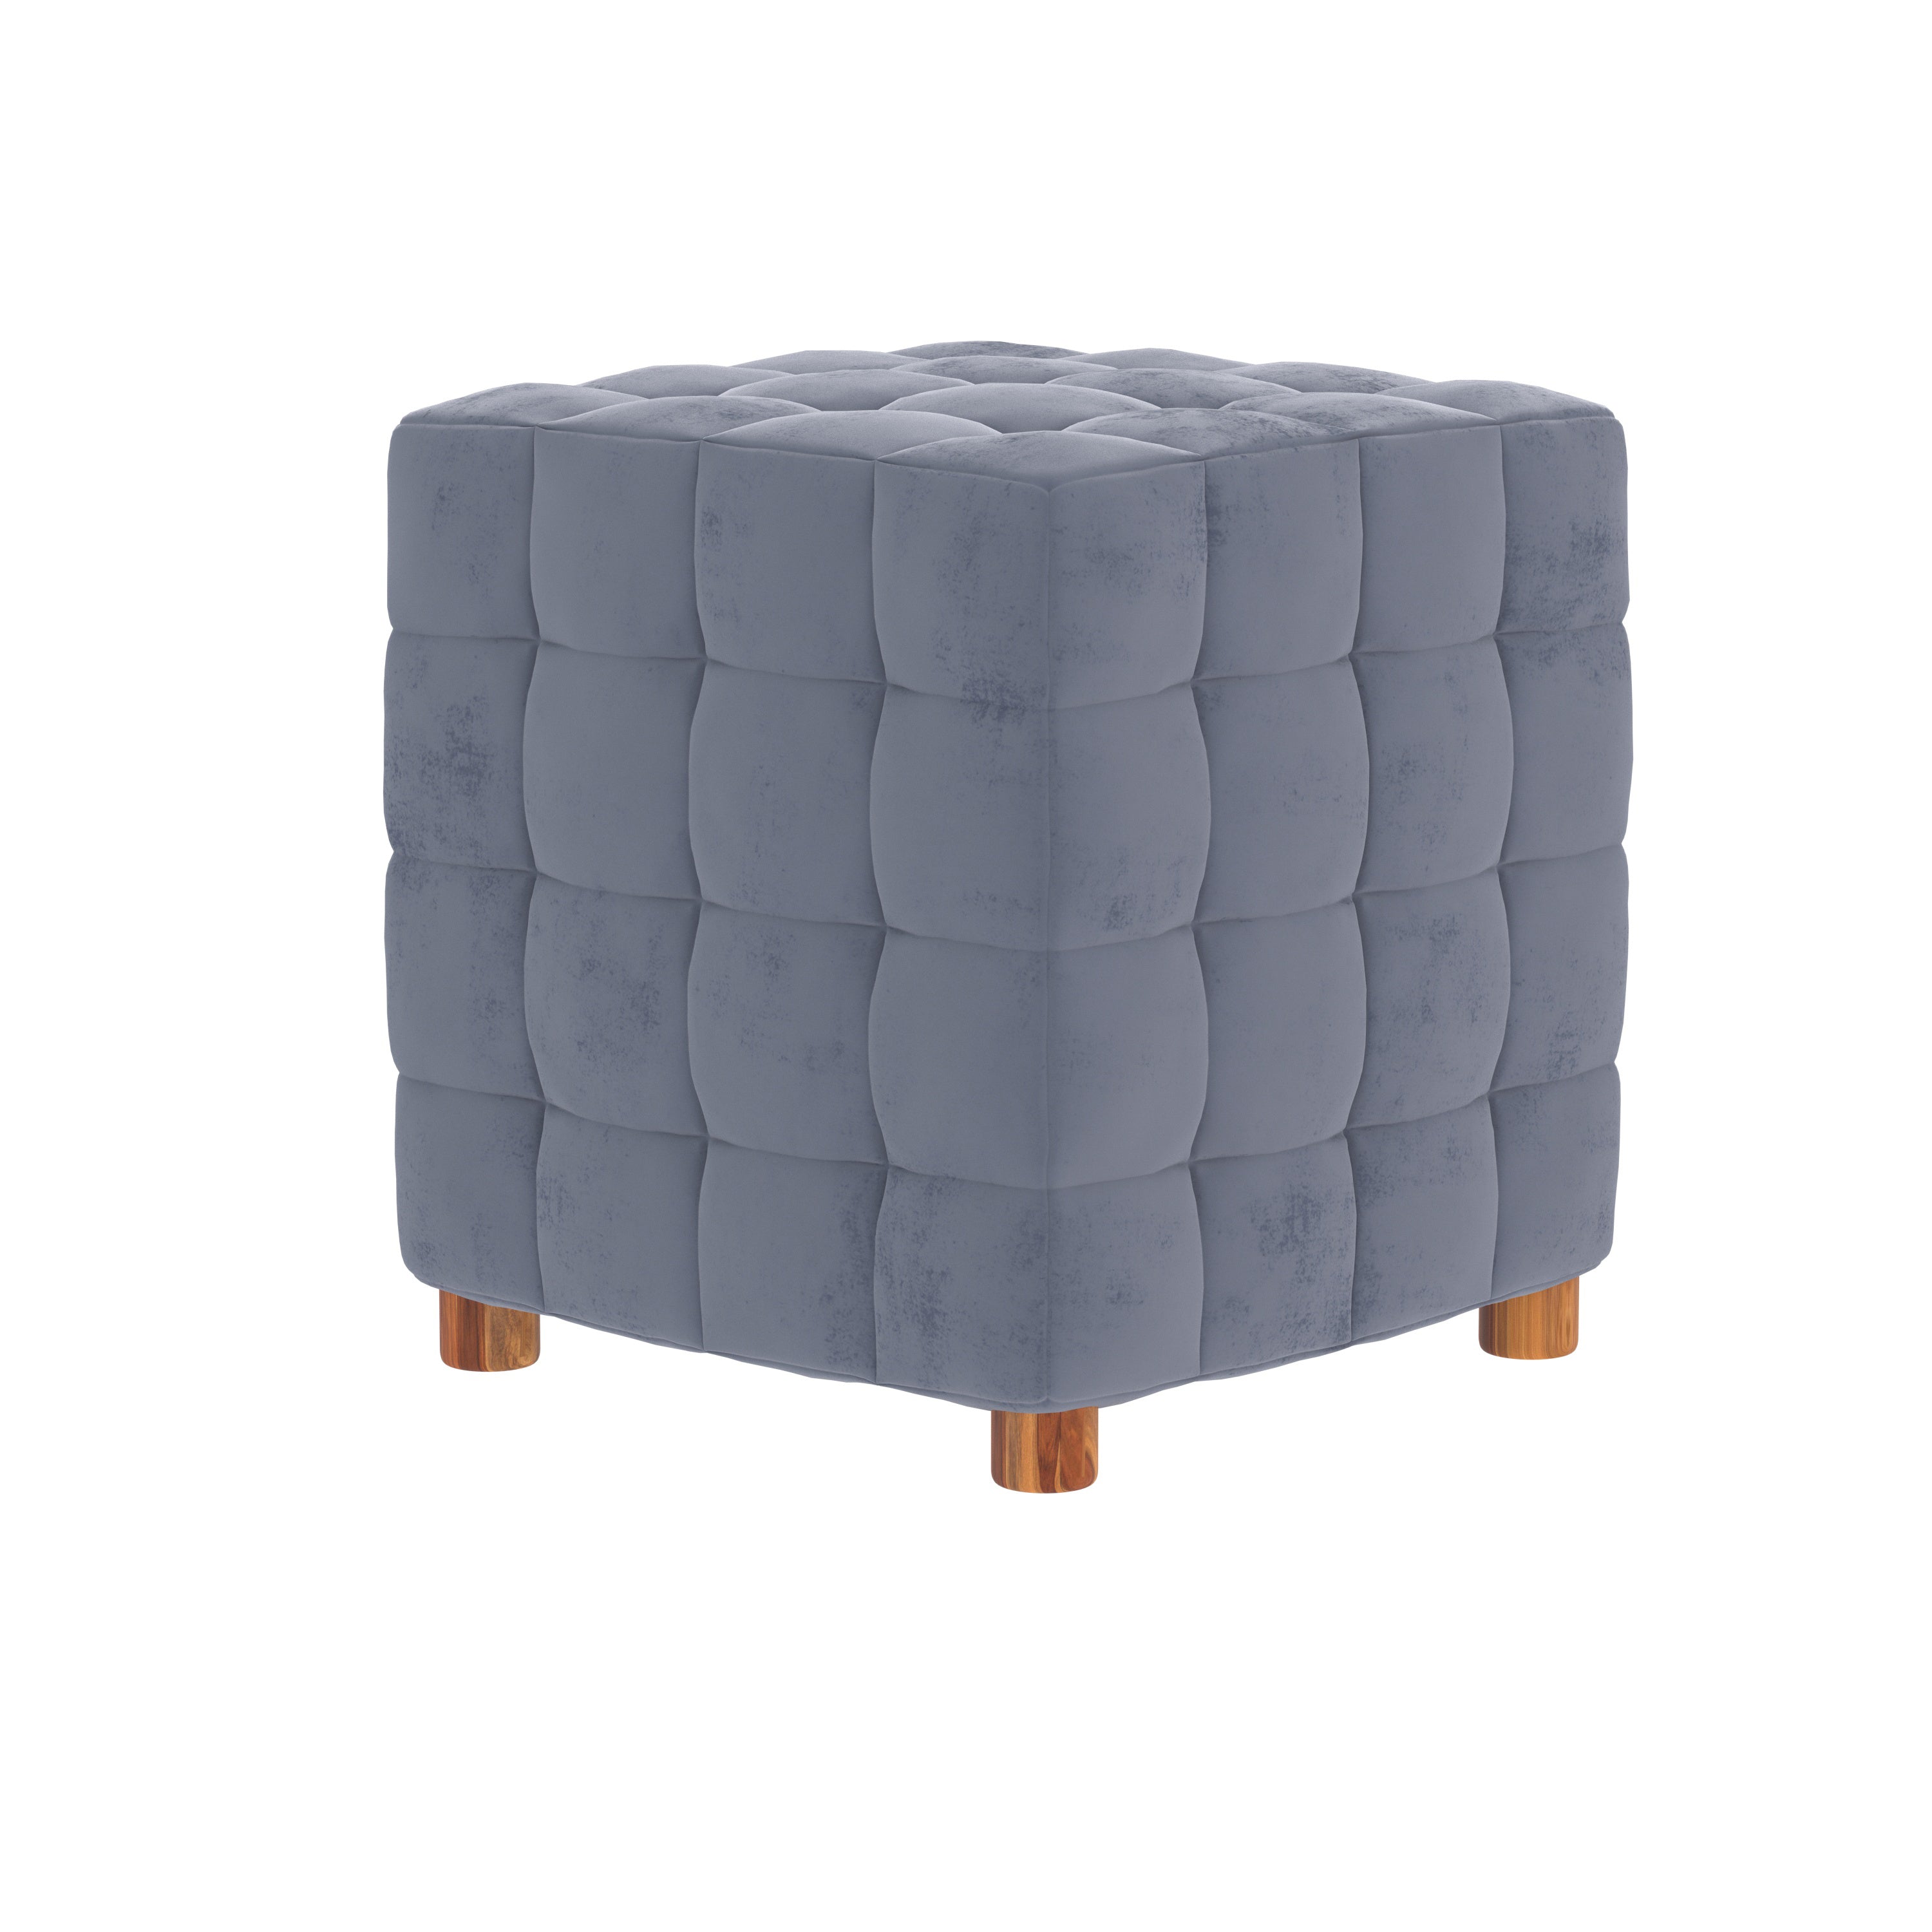 Classic Light Truffle Wooden Smooth Finish Light Seating Stool Pouf